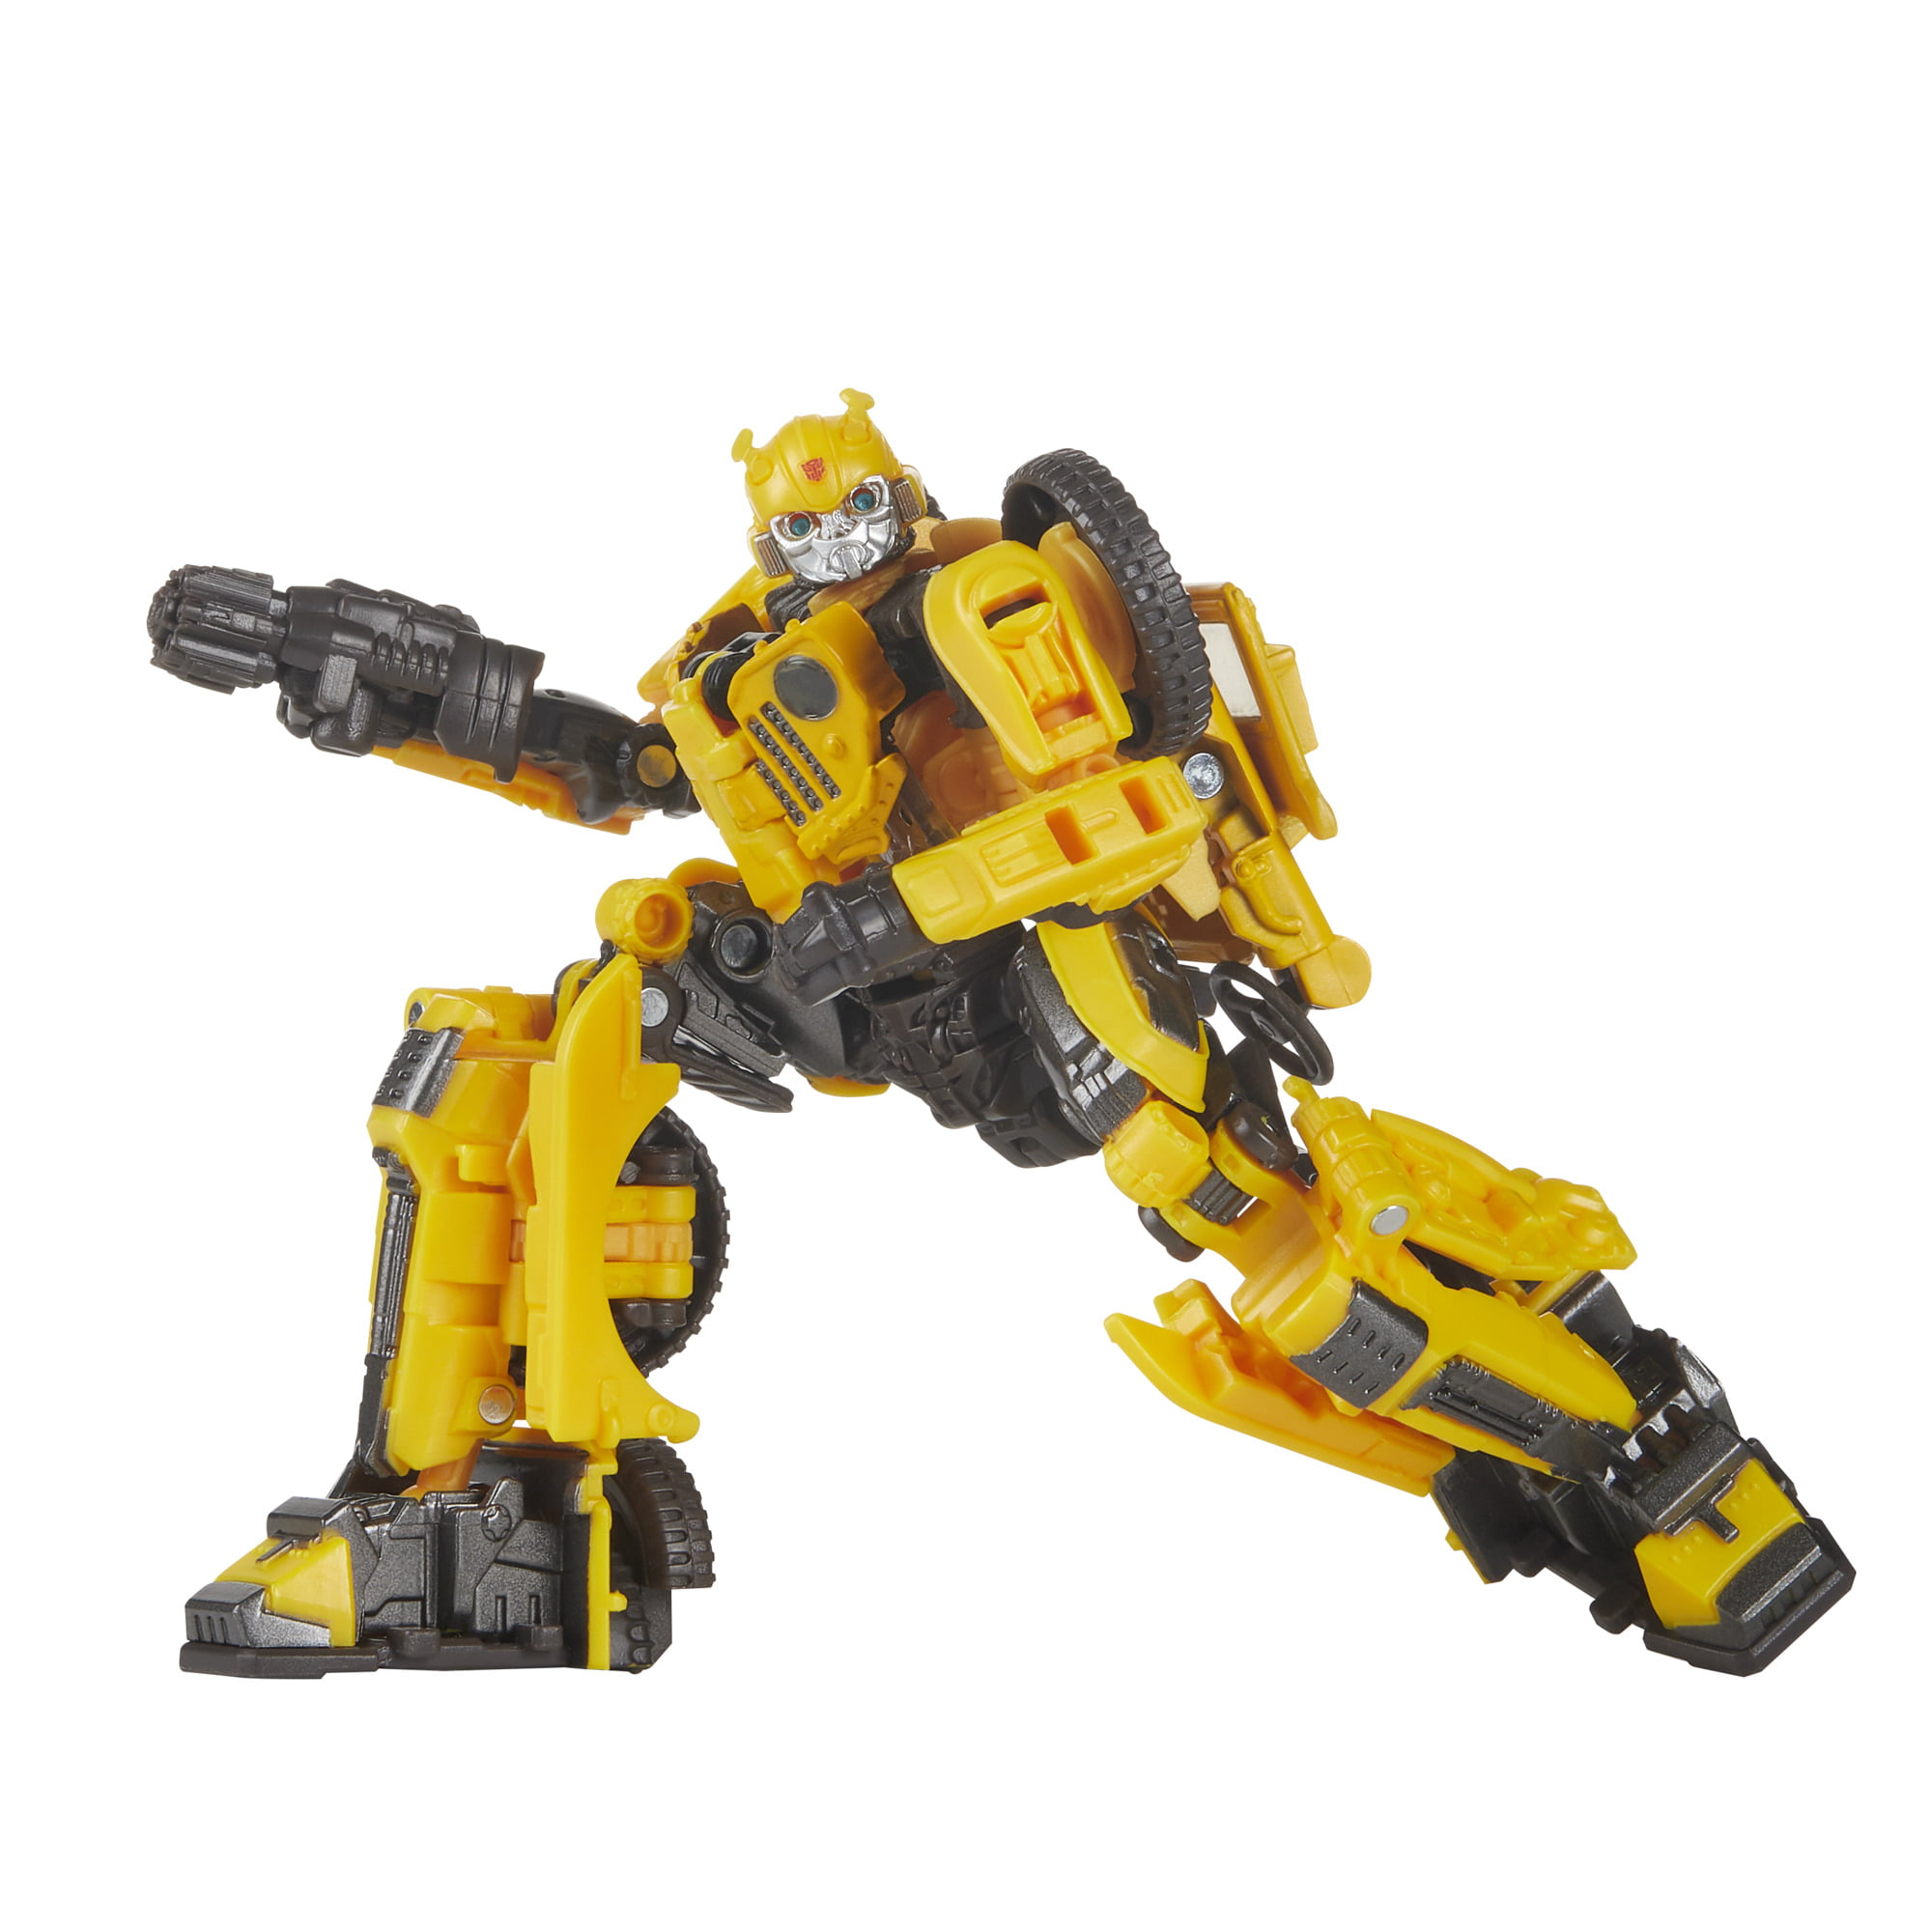 Transformers Toys Studio Series 57 Deluxe Class Bumblebee Action Figure Toy 